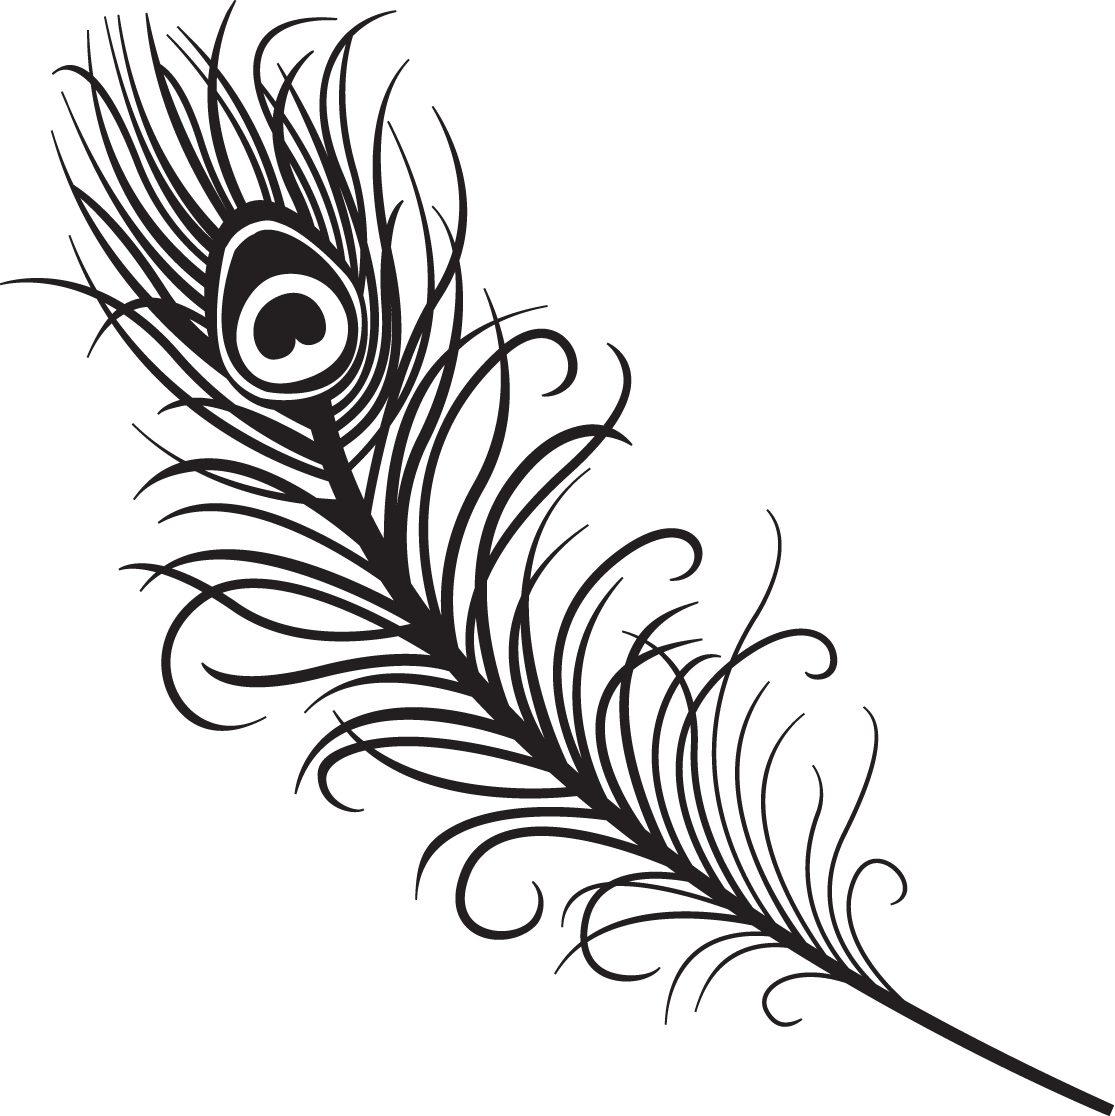 Peacock feather black and. Wing clipart stencil